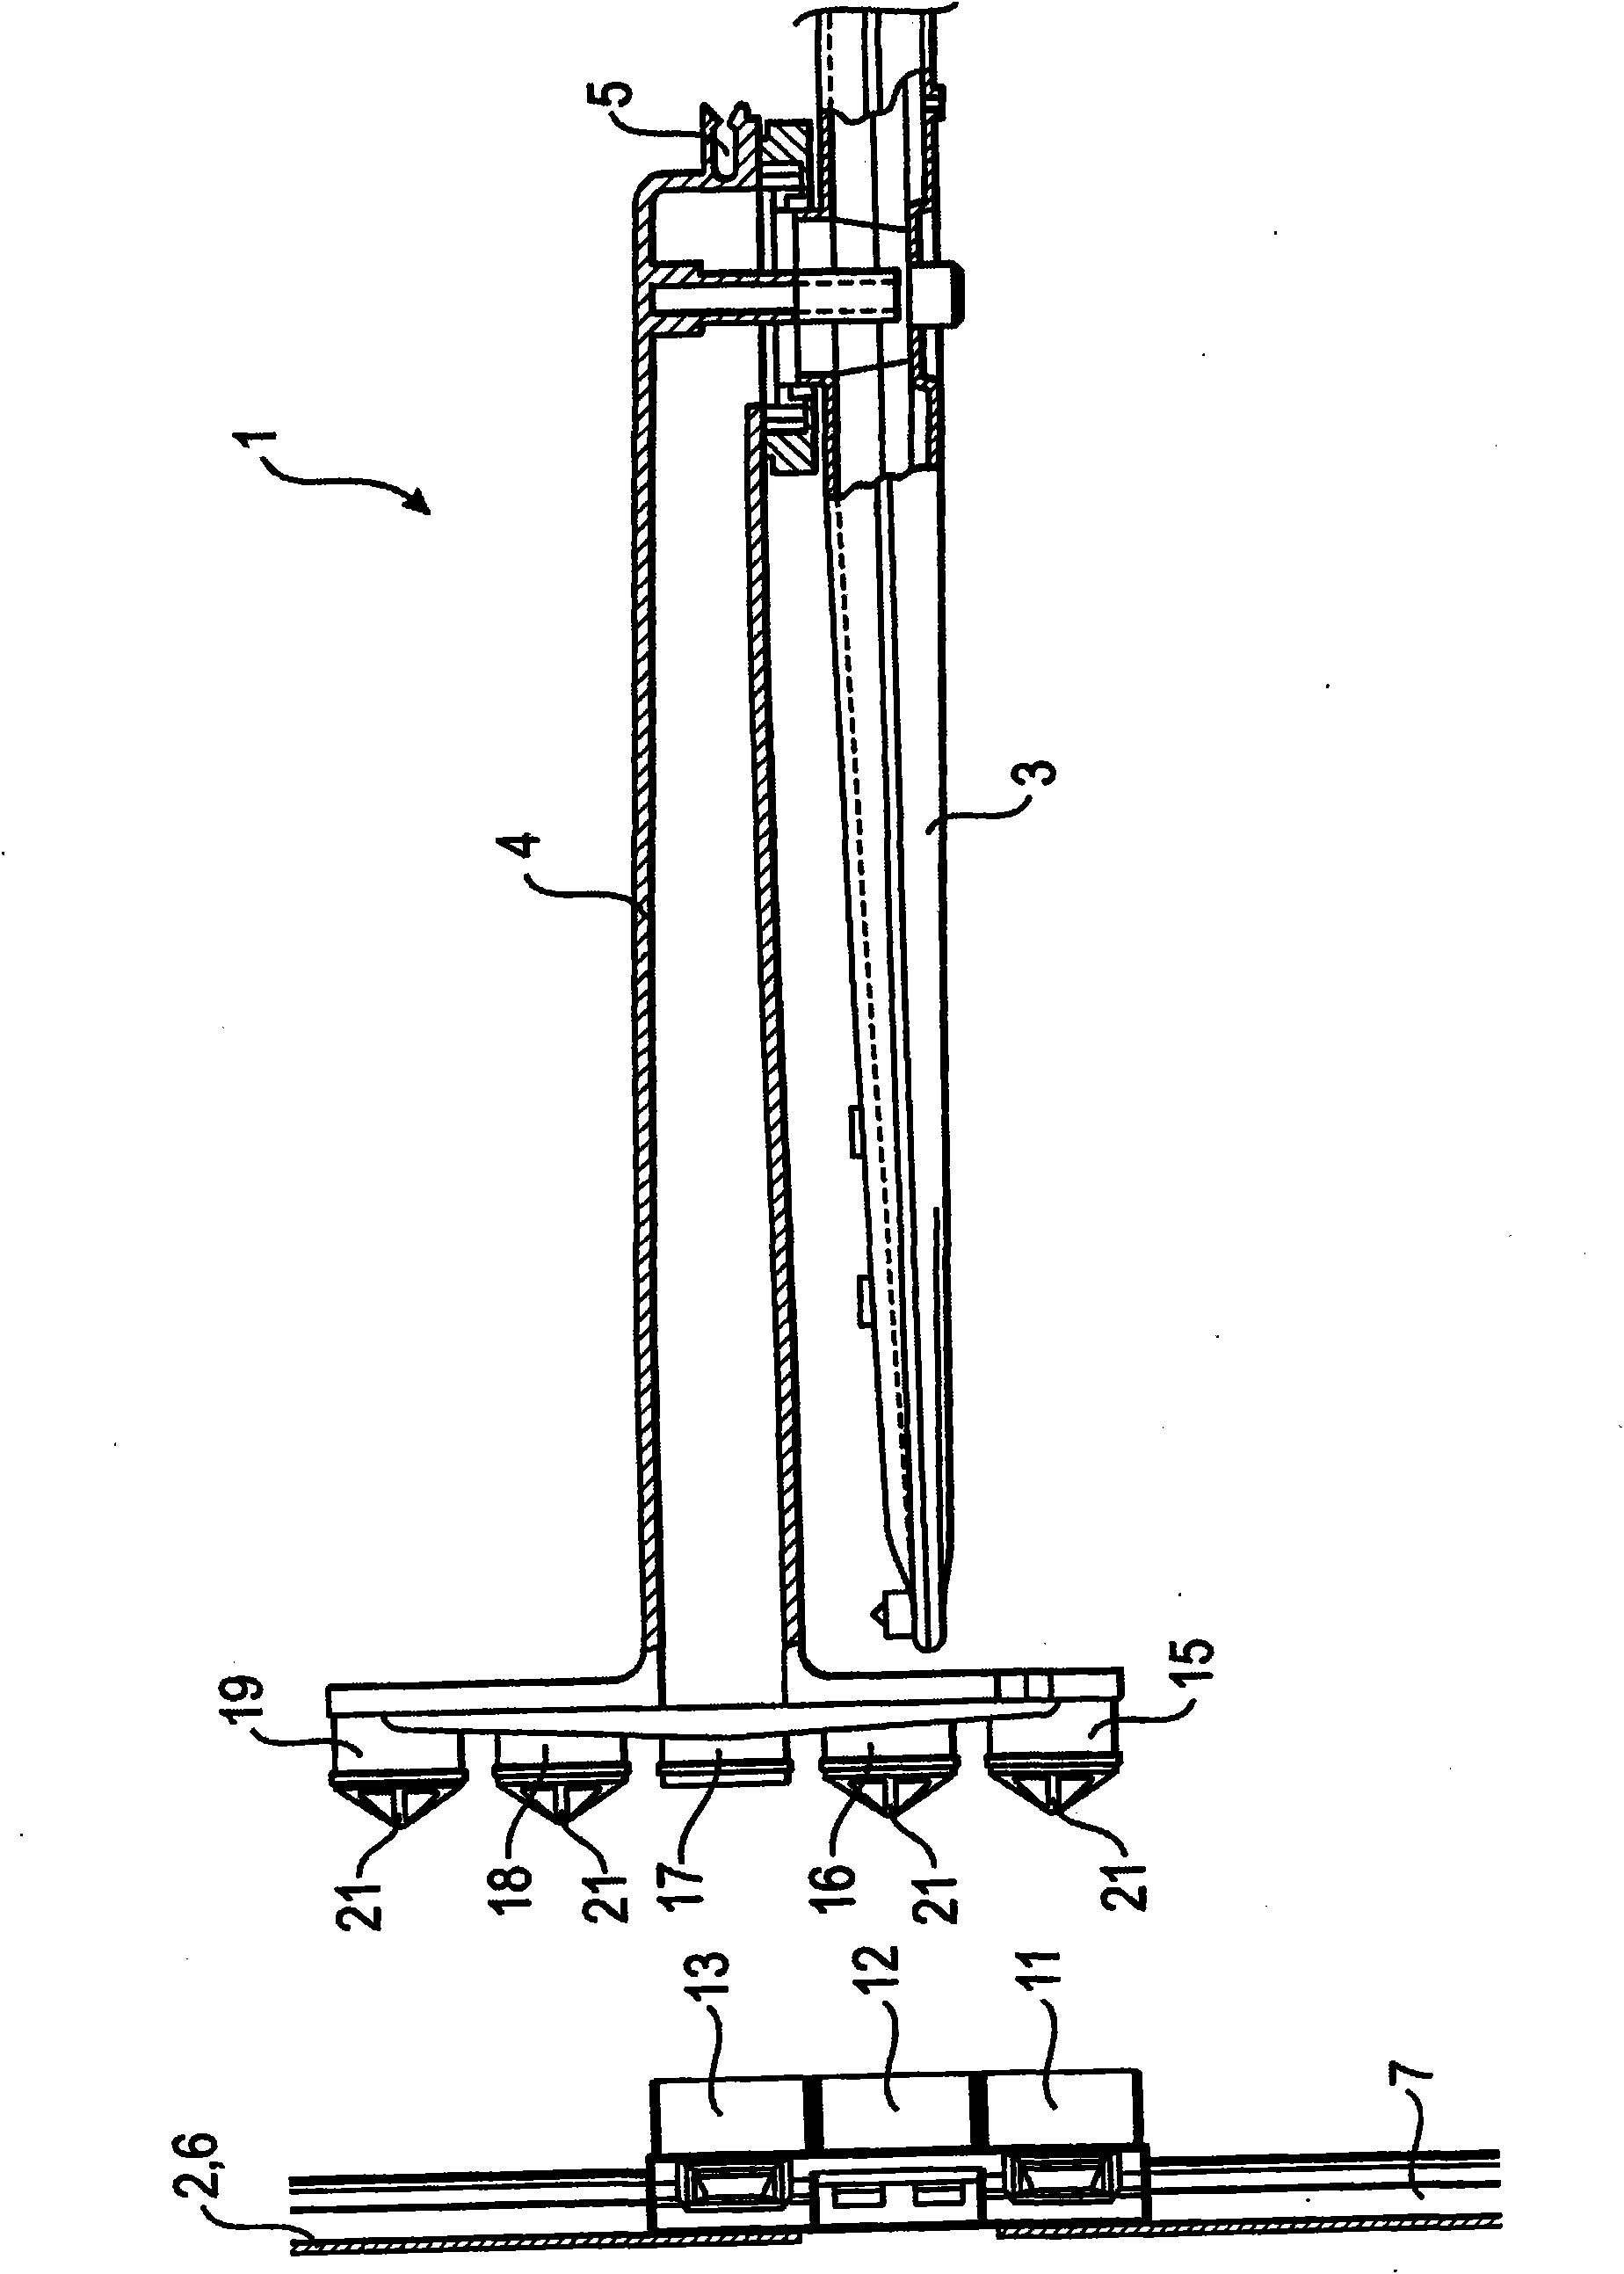 Hydraulic coupling of a vertically adjustable dish basket of a dishwasher